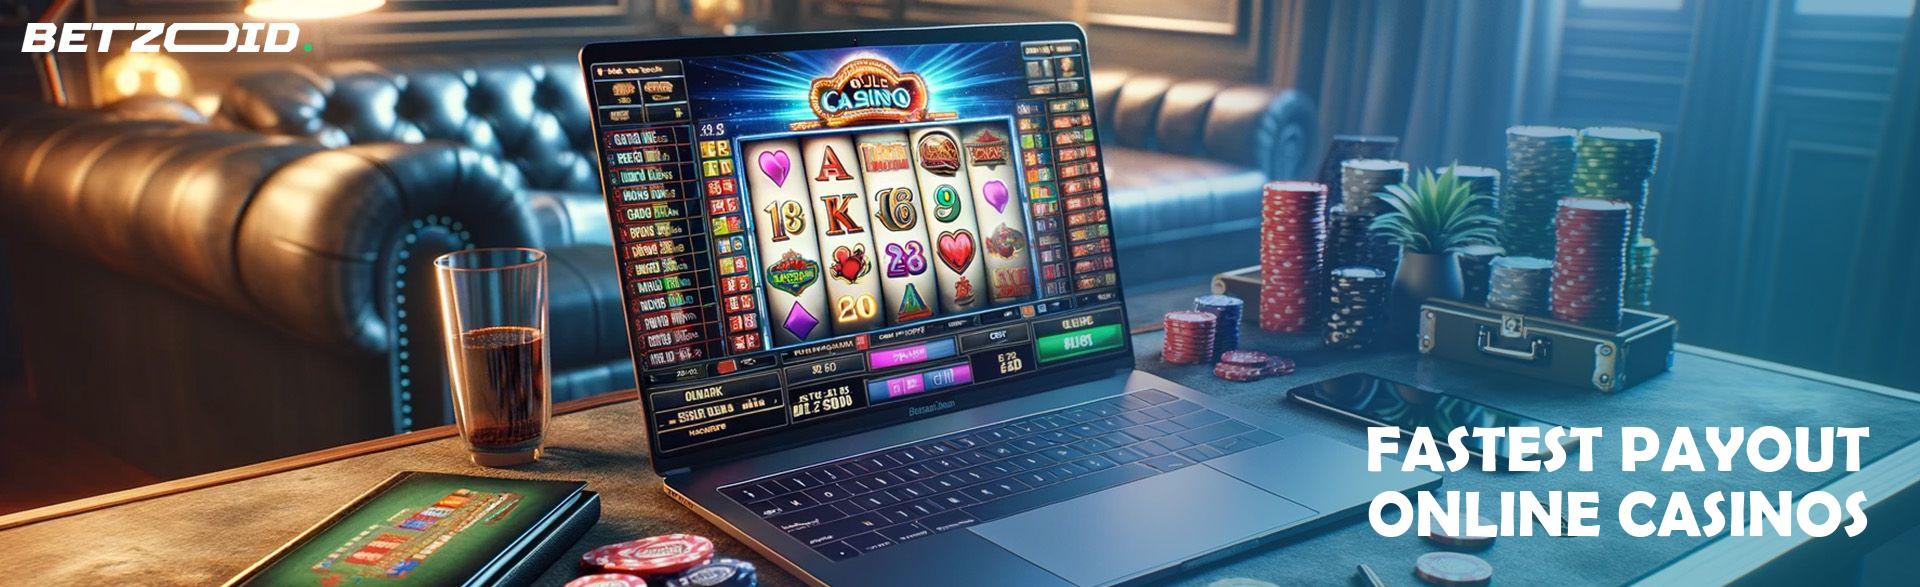 Fastest Payout Online Casinos.